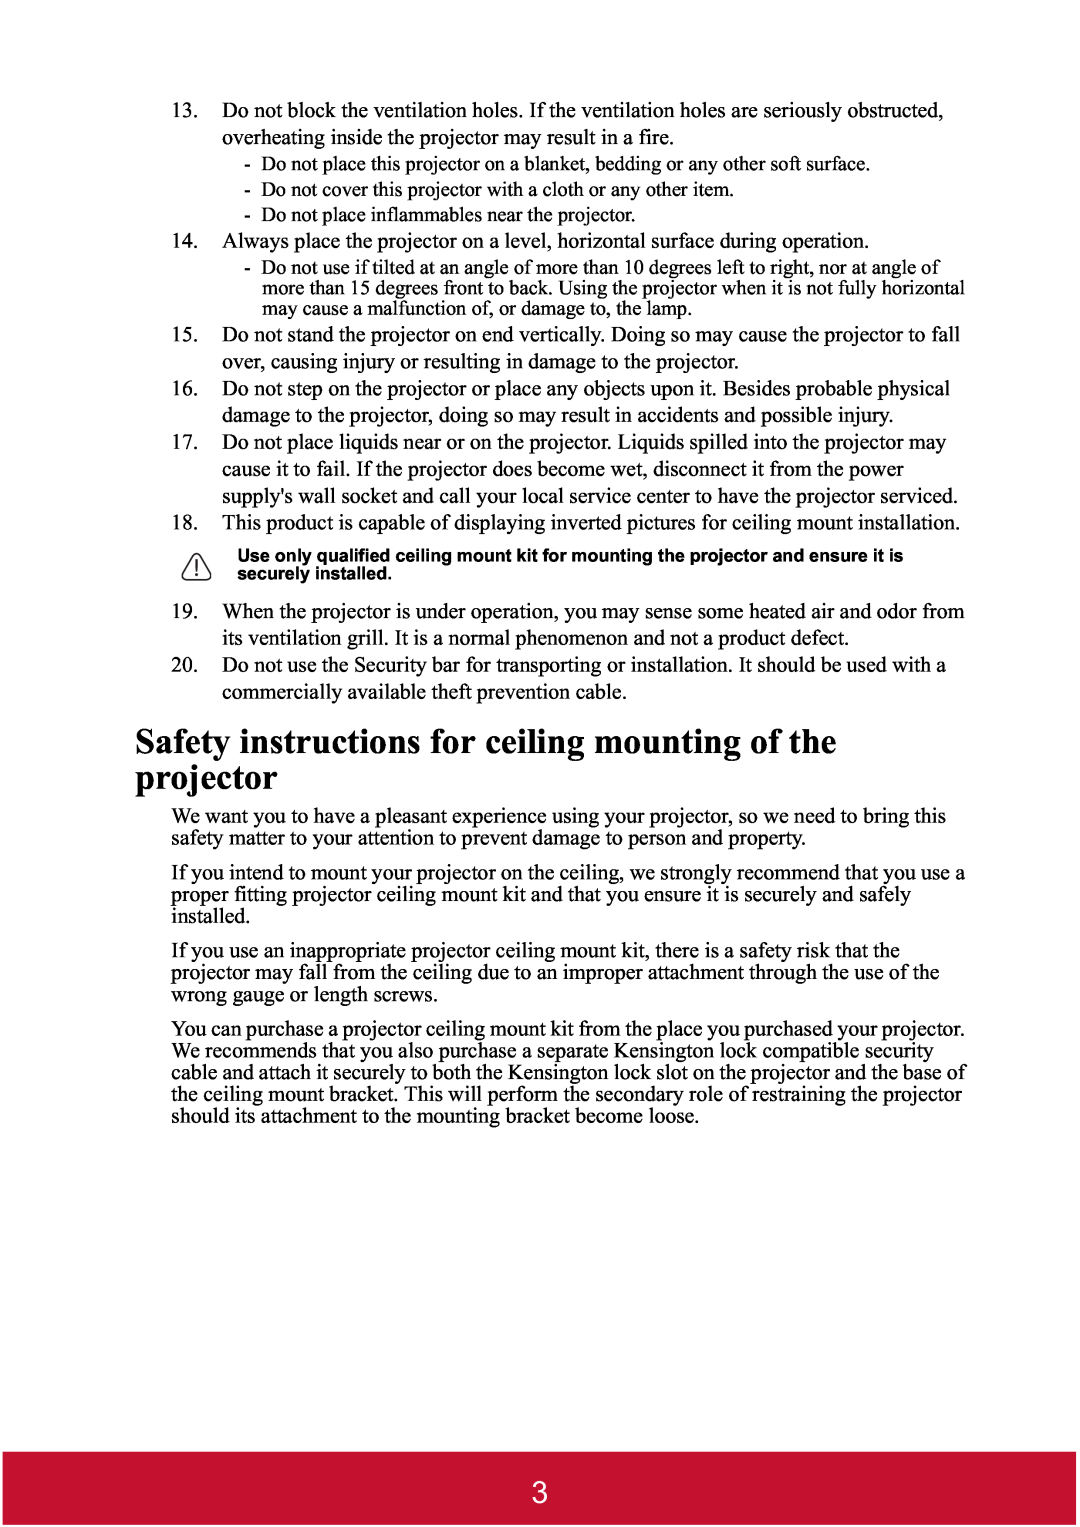 ViewSonic PJD7400 Safety instructions for ceiling mounting of the projector, Do not place inflammables near the projector 